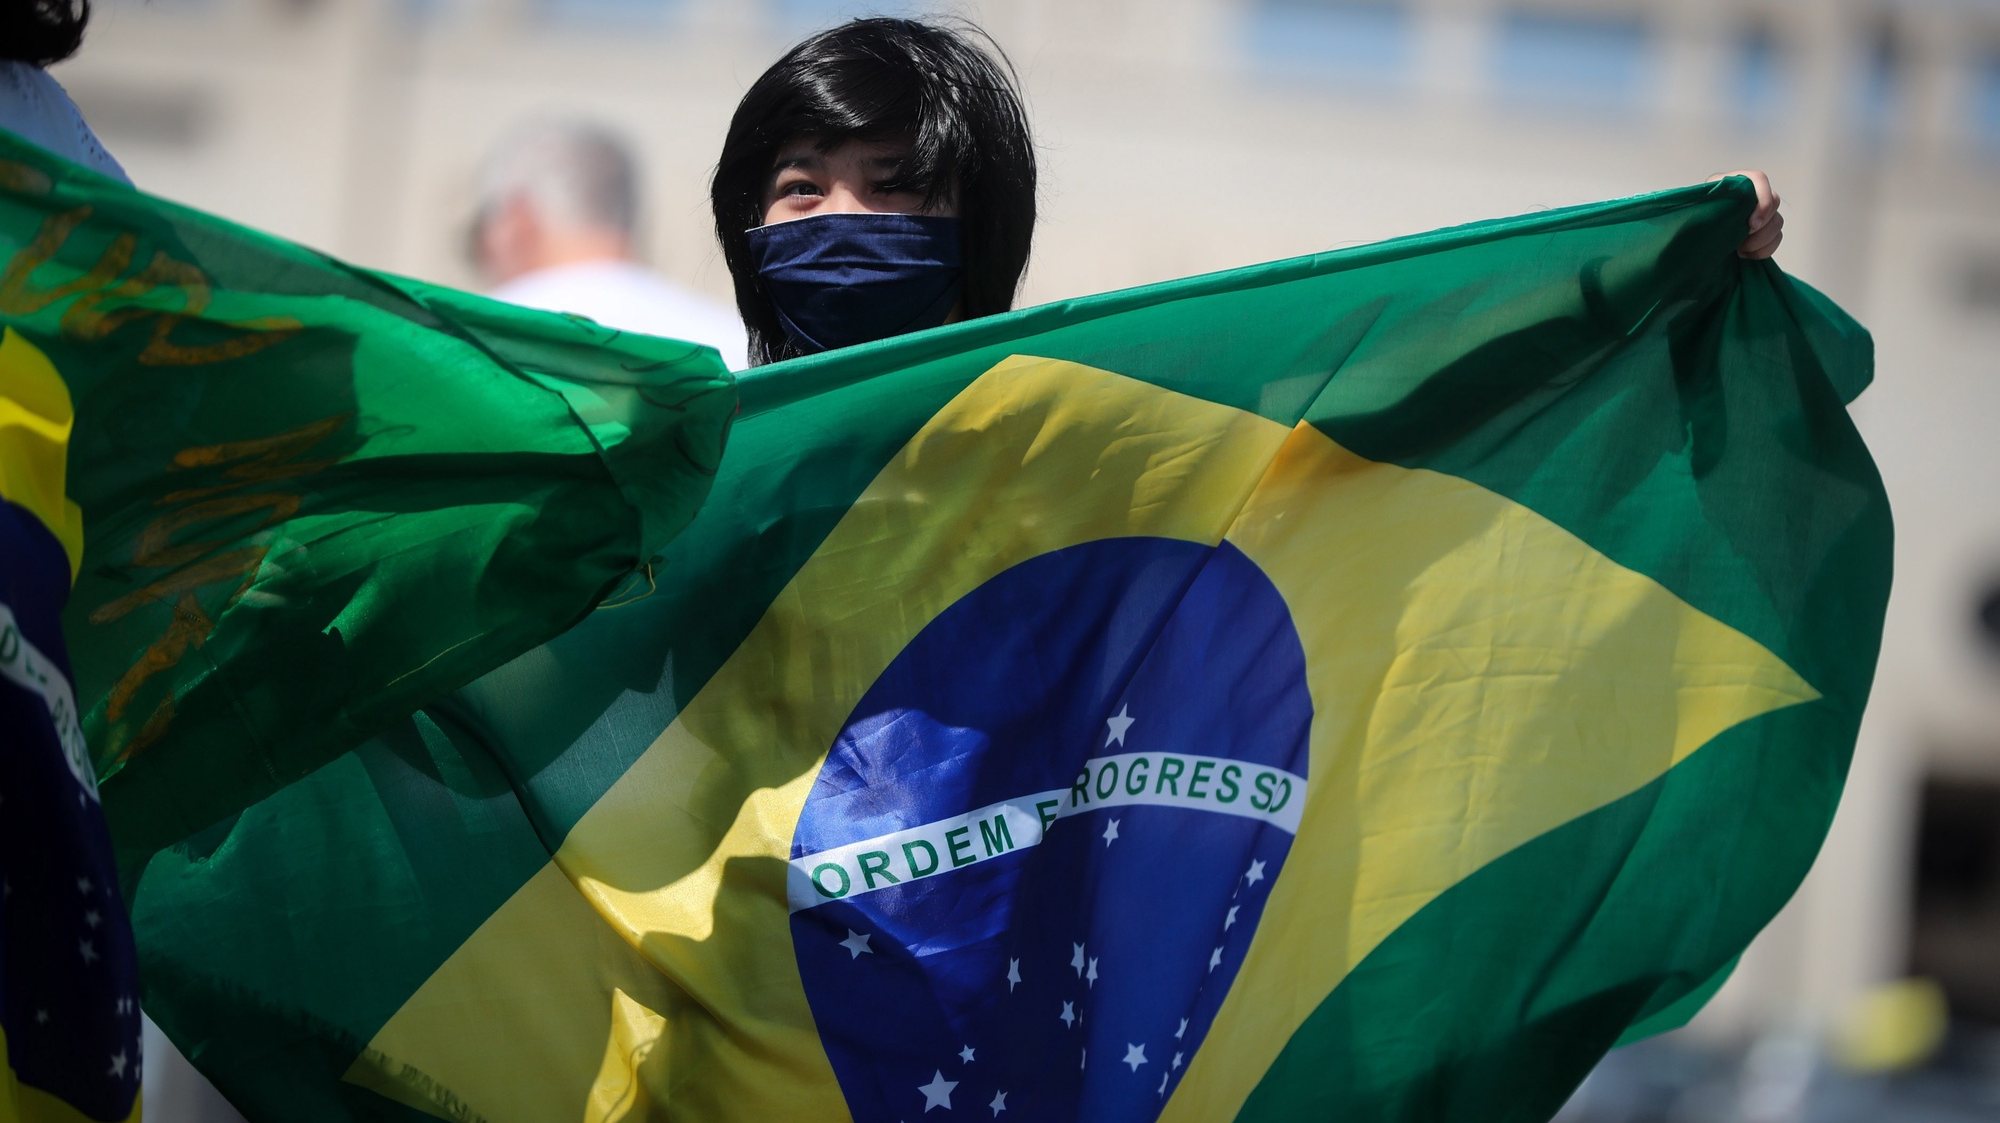 epa08651265 A person waves a Brazil&#039;s flag during a rally to shows the support to Java Lato operation in Sao Paulo, Brazil, 06 September 2020. Lava Jato, also known as Operation Car Wash, is a criminal investigation that uncovered a vast corruption scheme in the Brazilian state-owned Petrobras and led important politicians and businessmen from Brazil and Latin America to prison.  EPA/FERNANDO BIZERRA